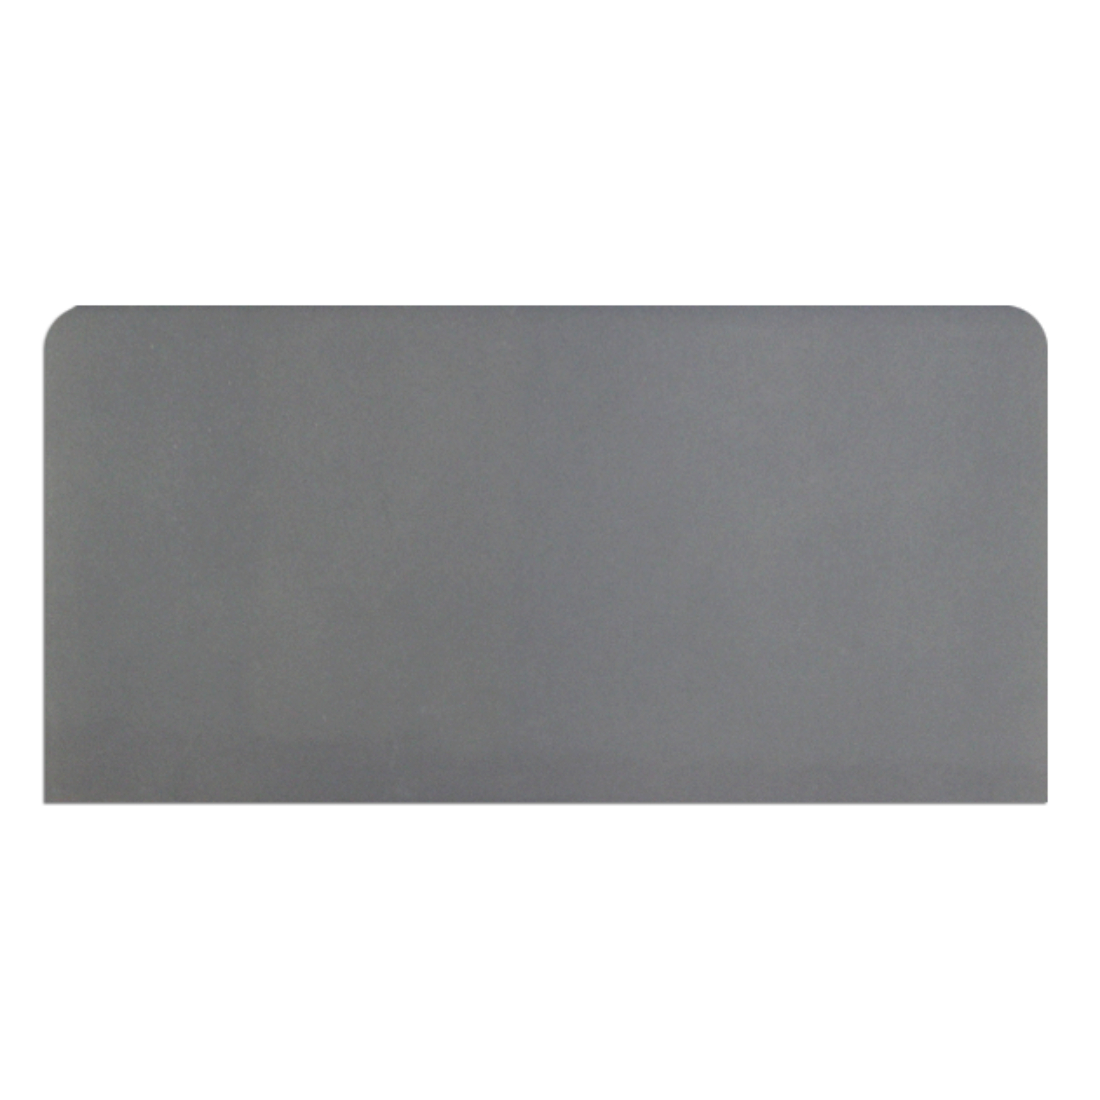 Imperial Pewter Gls 10x20 REL